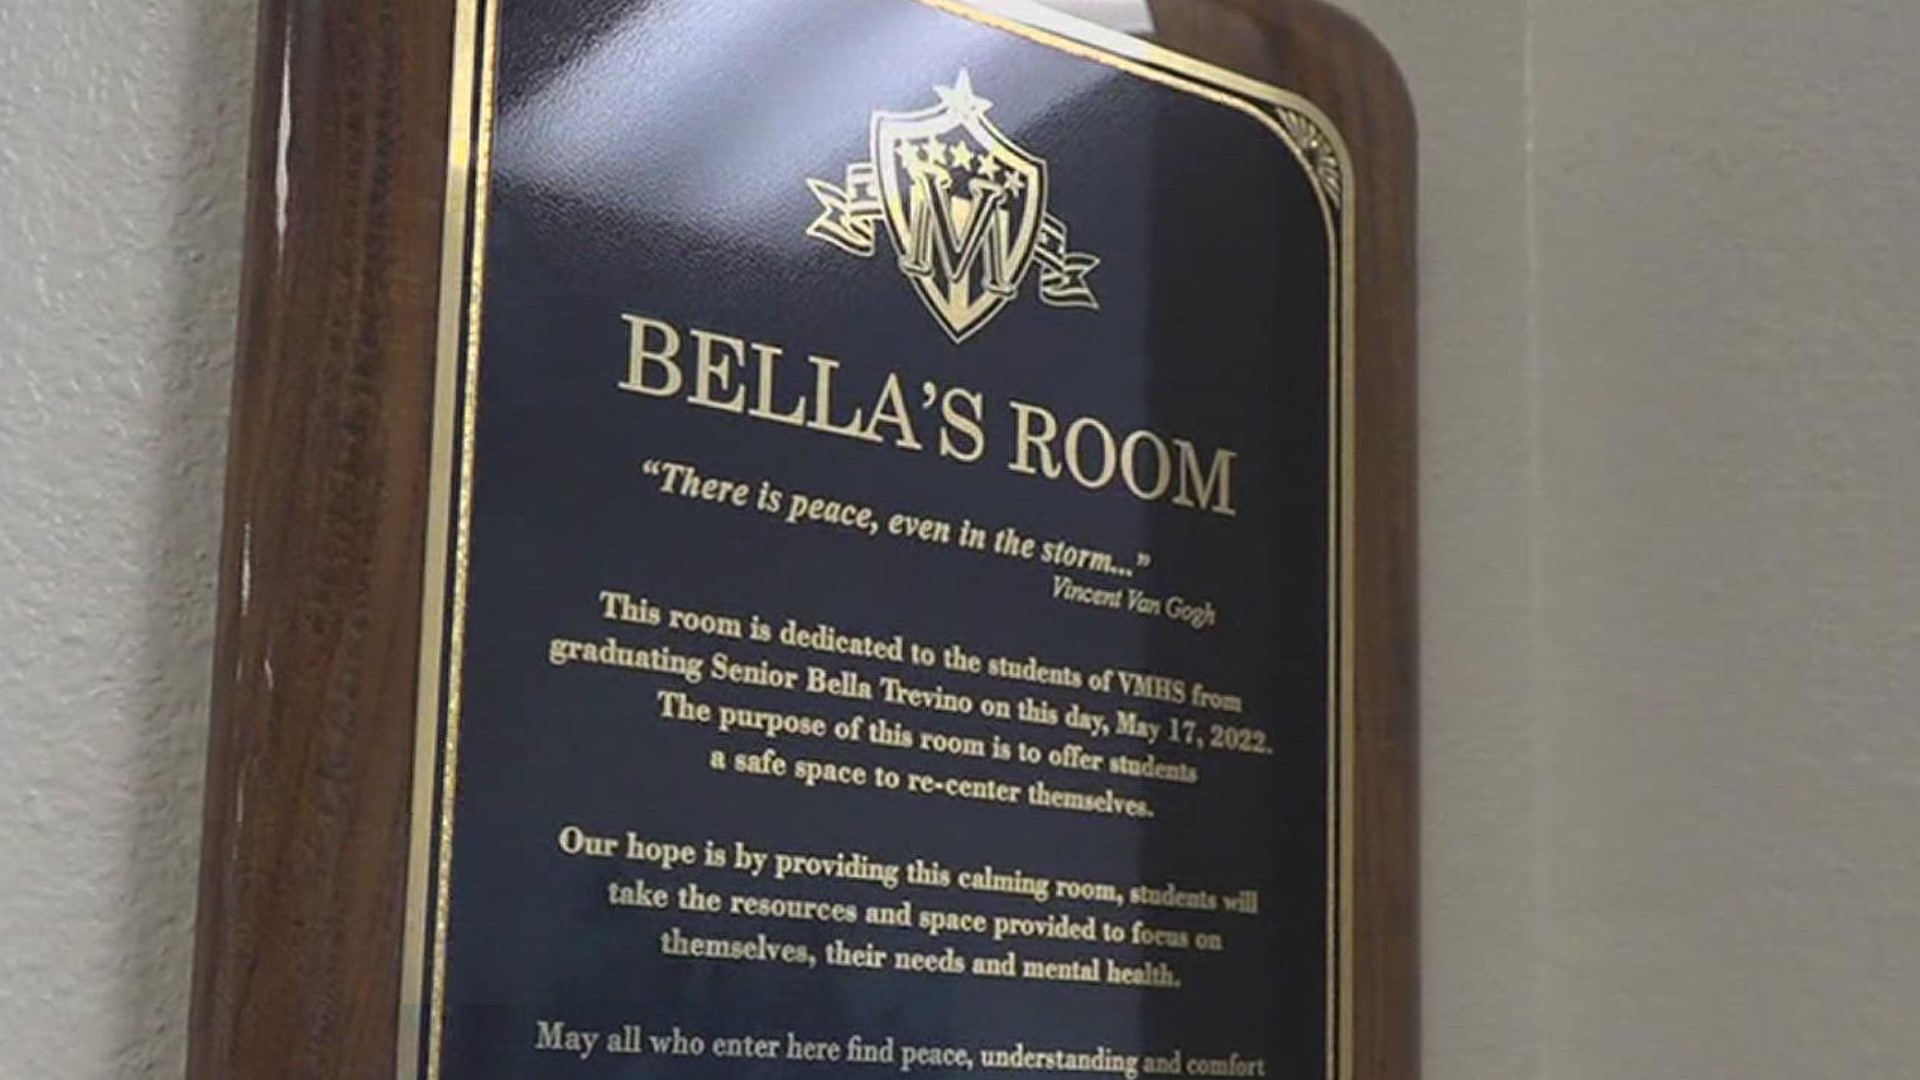 It was through an urgent need that Trevino created a space called "Bella's Room." The space serves as a way for students to release stress.